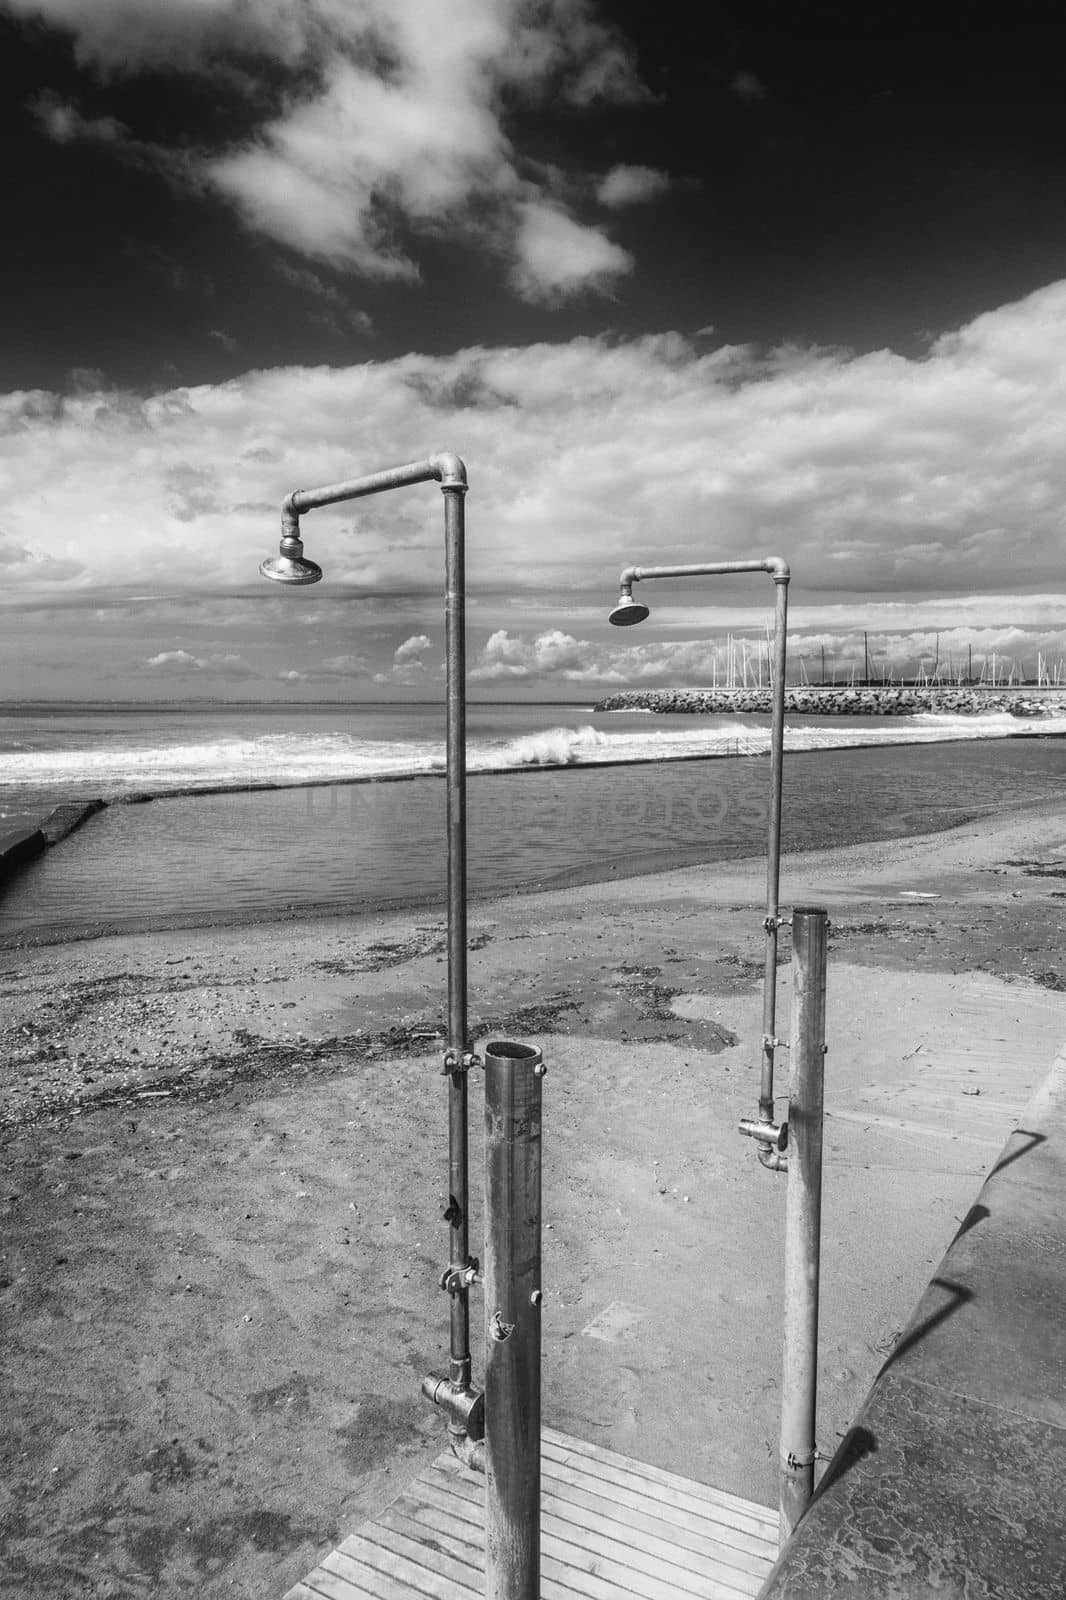 On a deserted sandy beach there are two ageing showers waiting for bathers.